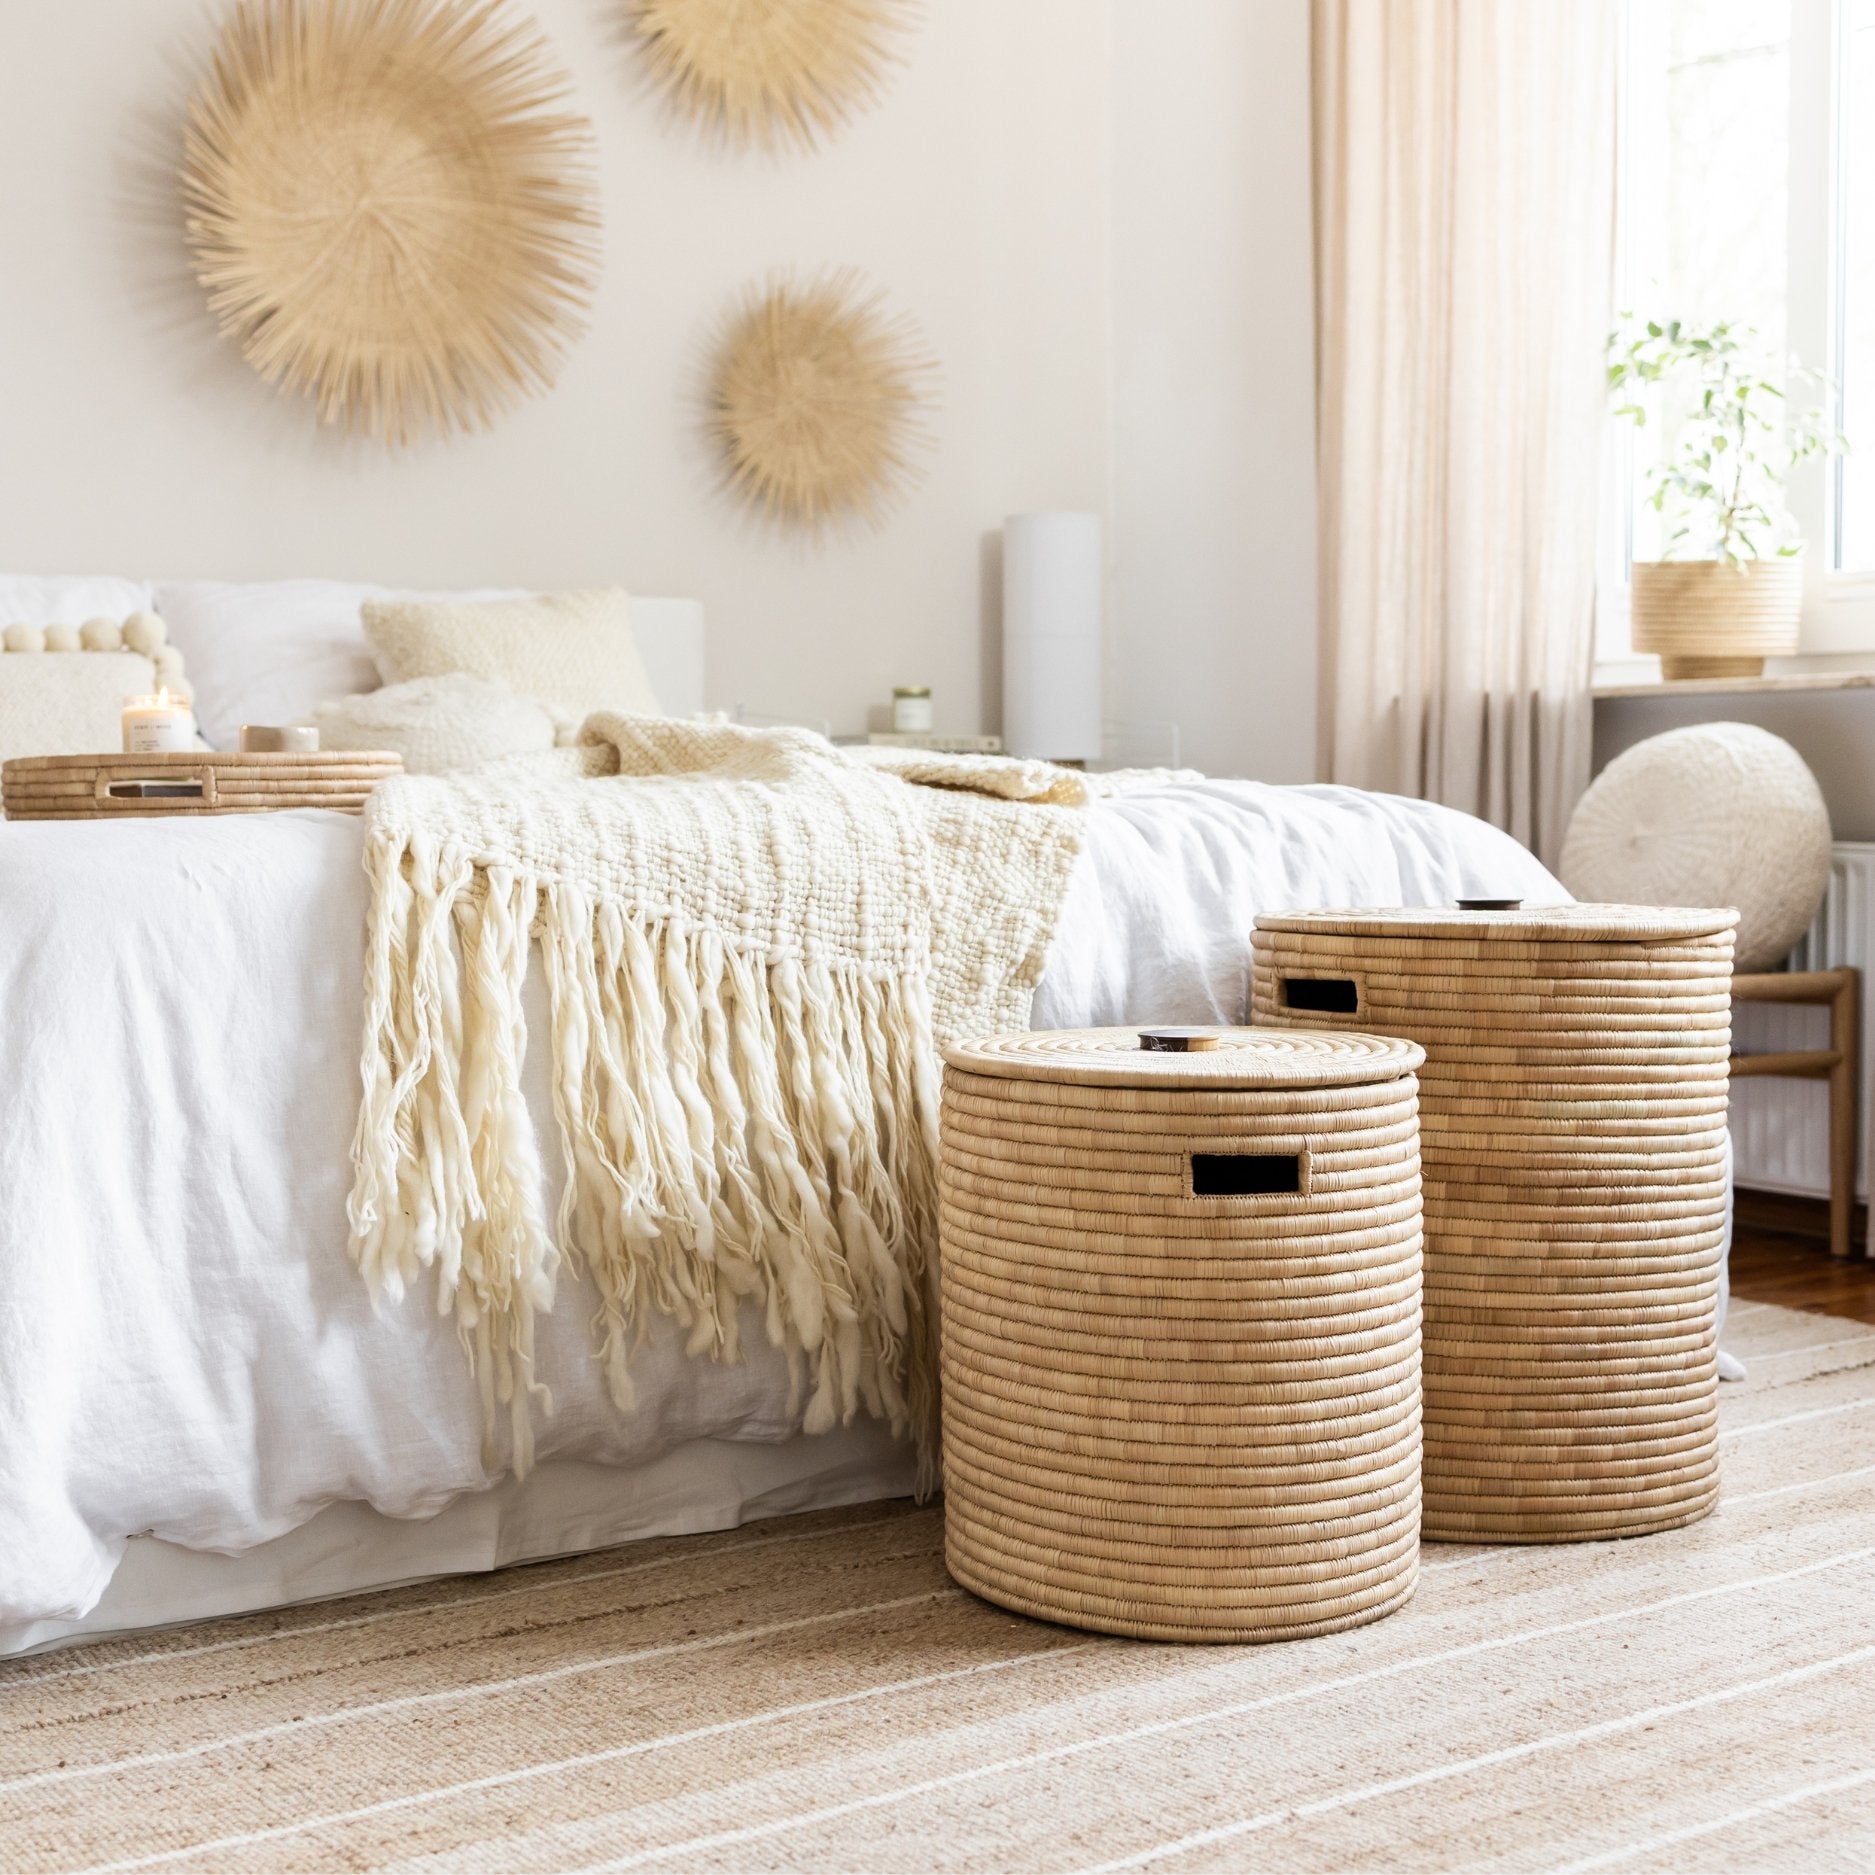 Laundry baskets with lid woven from palm fiber - By Native